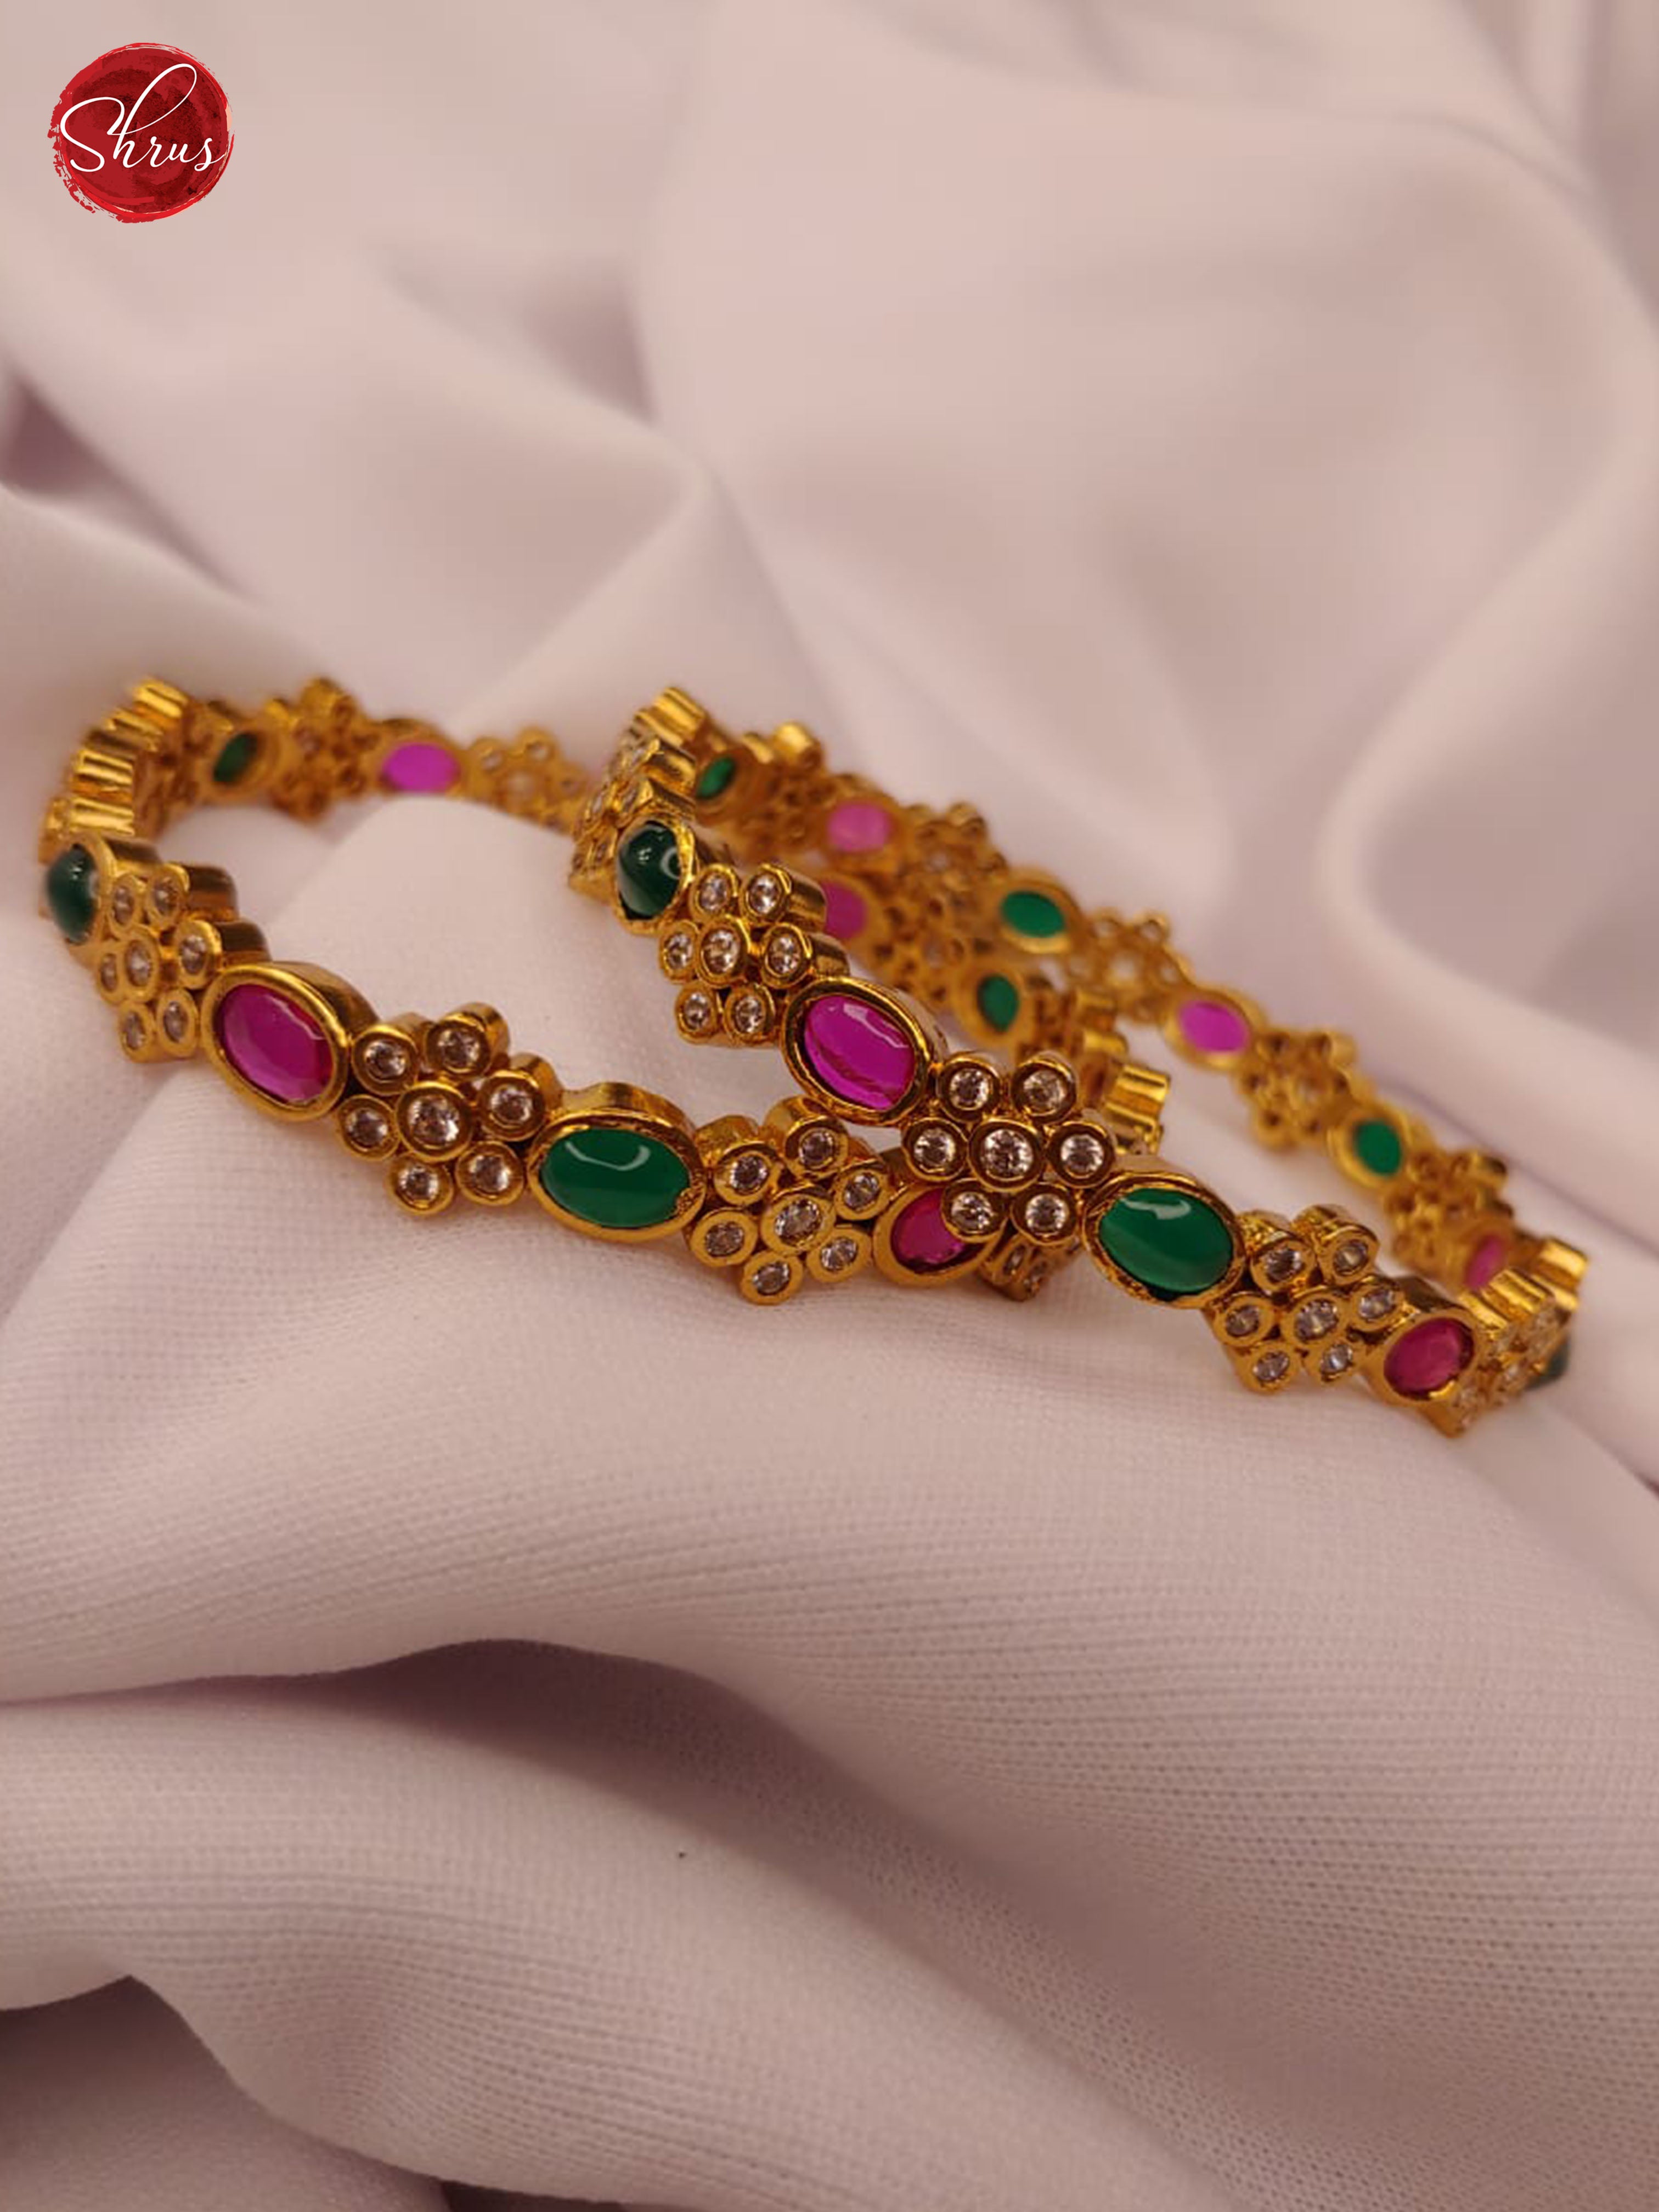 ACCESSORIES - BANGLES (ARTIFICIAL) SIZE - 2.6 - Shop on ShrusEternity.com